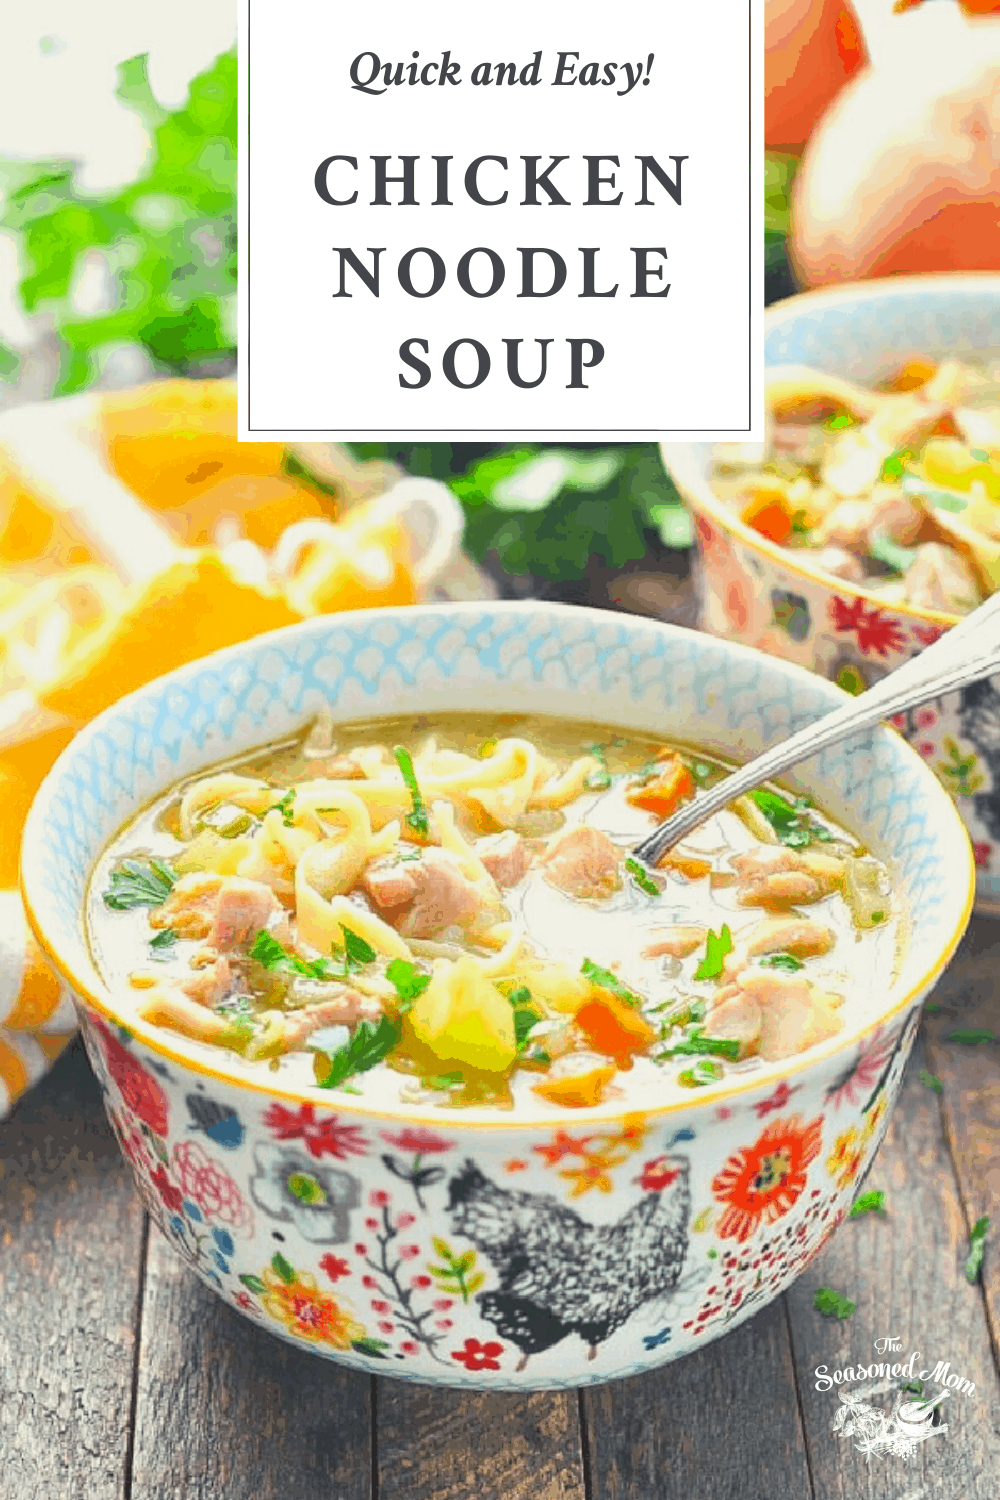 Easy Chicken Noodle Soup - The Seasoned Mom